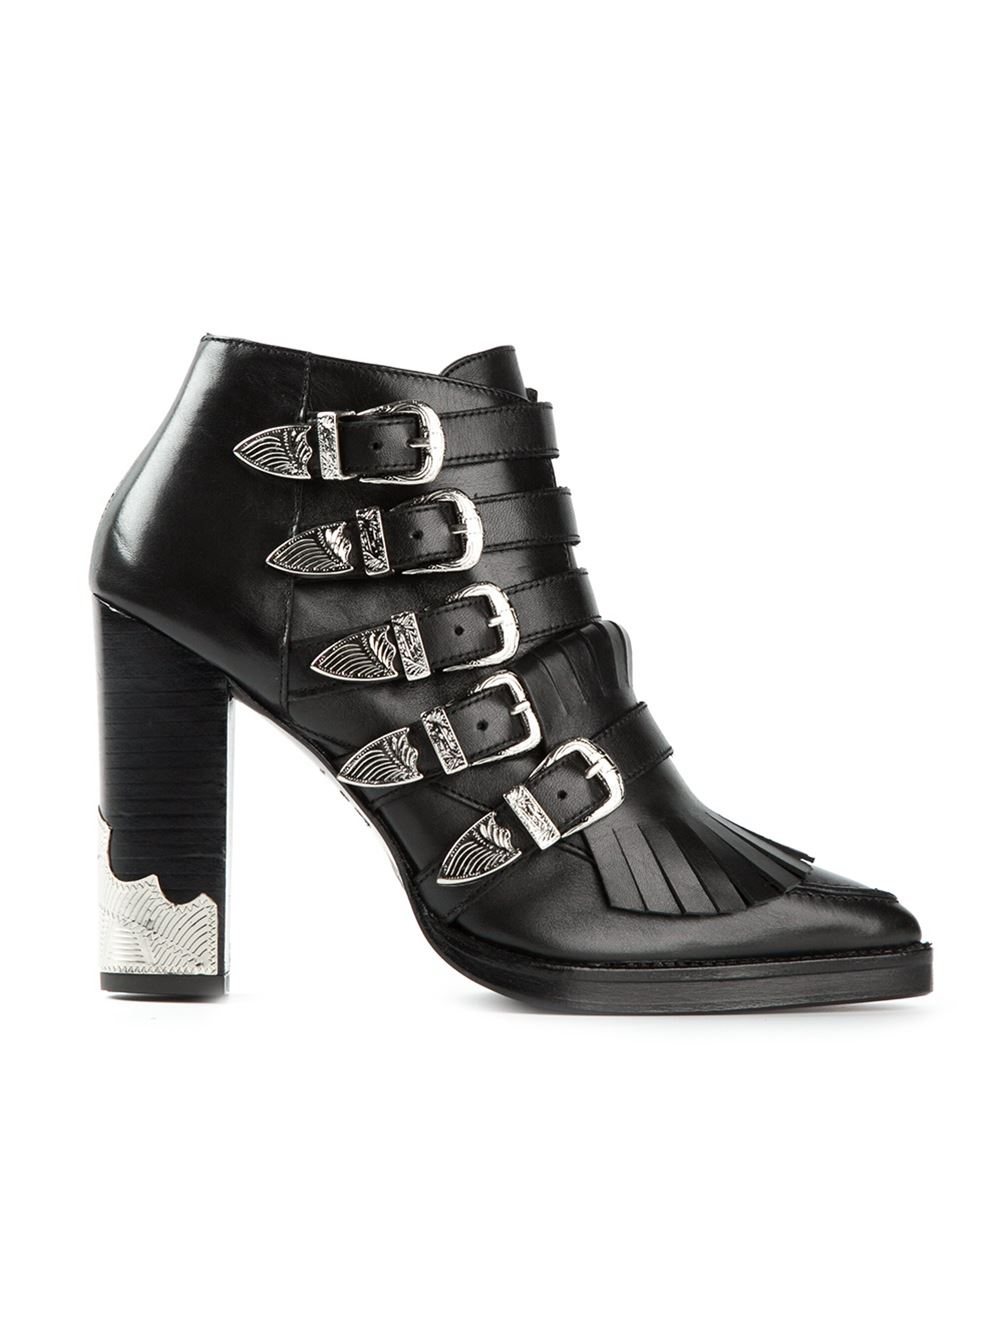 Toga Pulla Fringed Ankle Boots in Black | Lyst